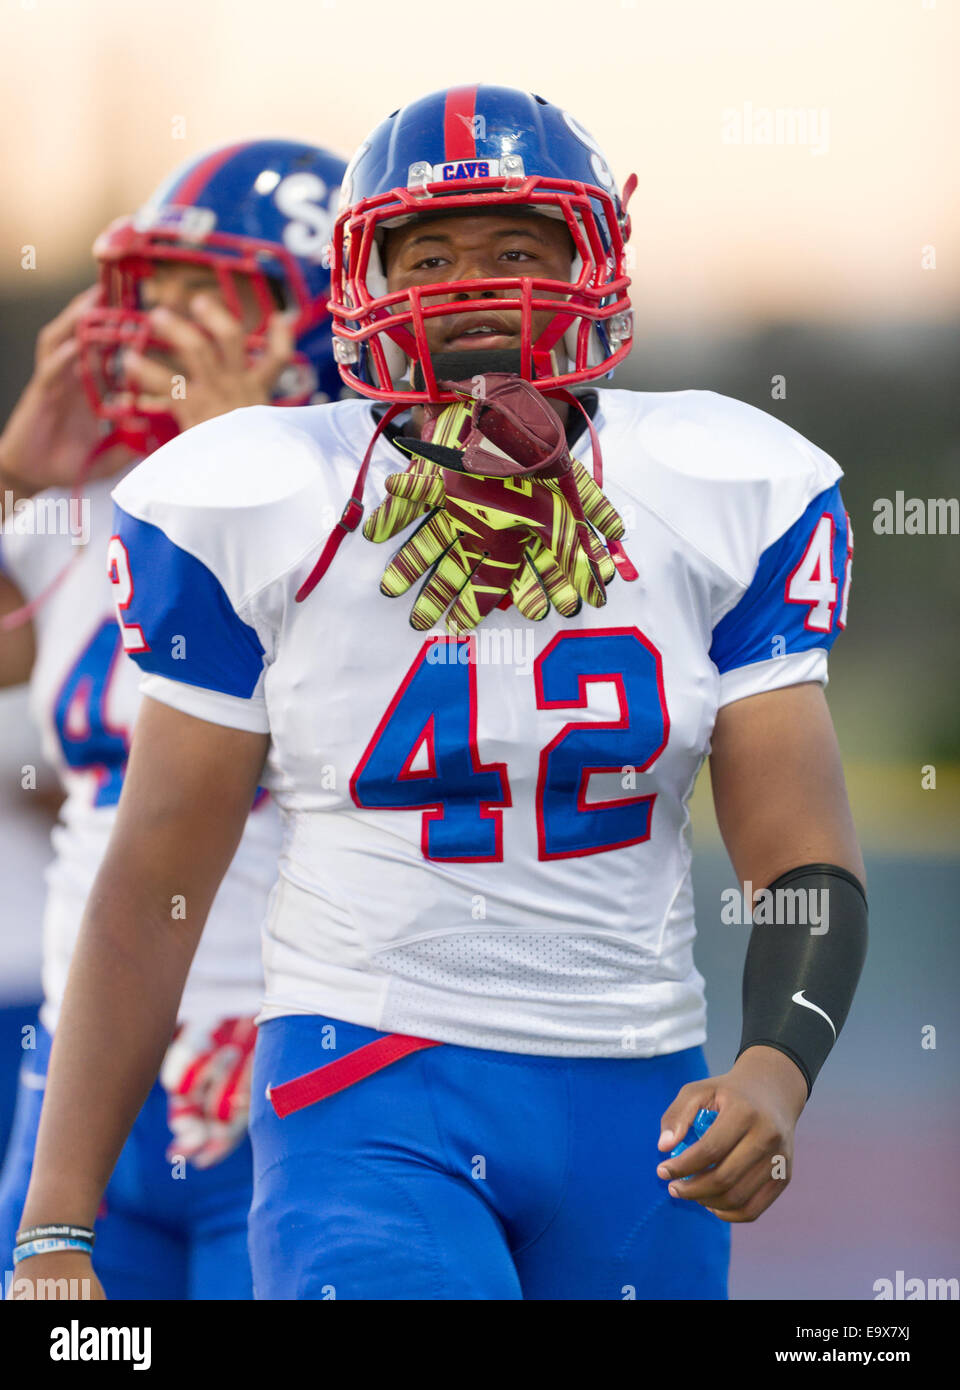 October 4, 2014, La Puente, CA.Gardena Serra cavaliers linebacker (42) Eric Sharber on the sideline during the Bishop Amat upset of the Cavaliers at Bishop Amat high school on October 3, 2014. The Cavaliers who are usually a nationally ranked high school football team, were upset by Bishop Amat 14 - 7. (Mandatory Credit: Ed Ruvalcaba/MarinMedia.org) (Complete photographer, and company credit required) Stock Photo